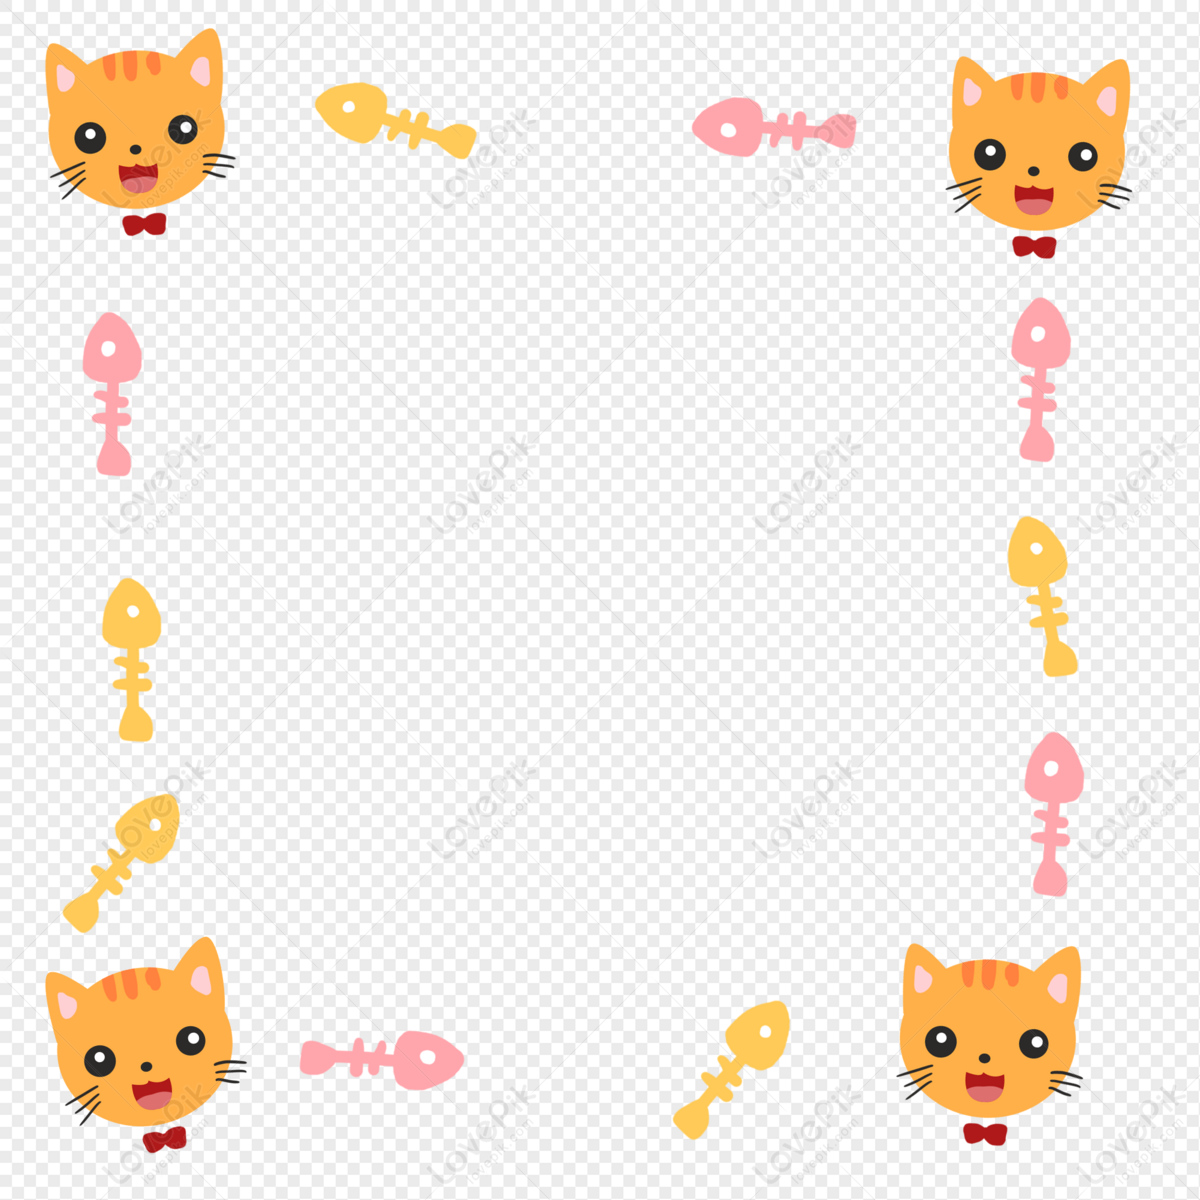 Cute Cat Avatar Border Decoration PNG Image Free Download And ...